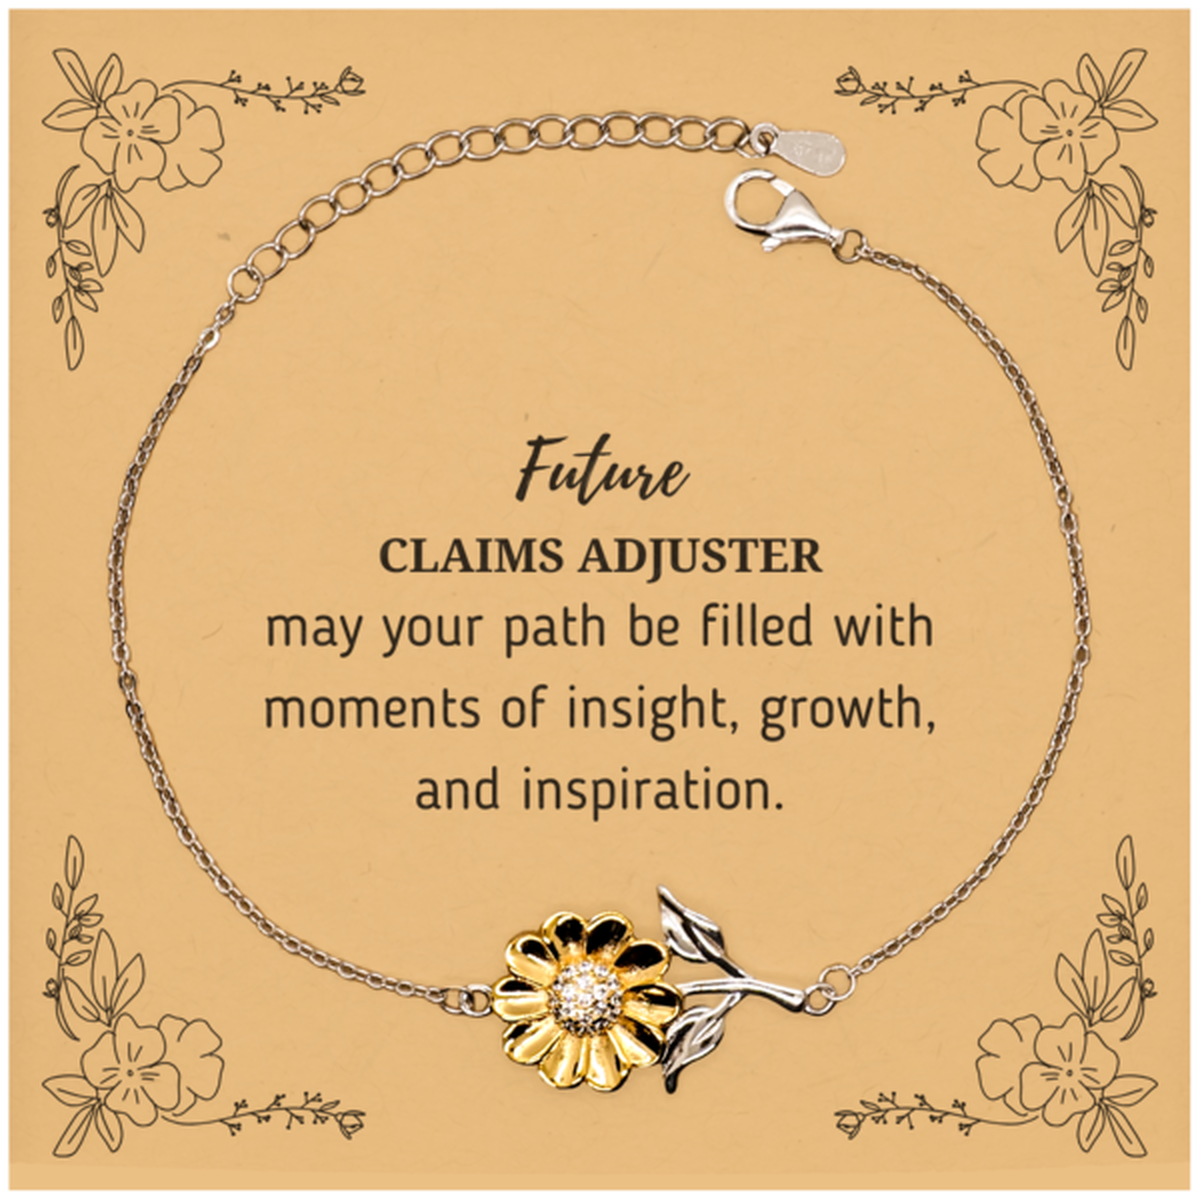 Future Claims Adjuster Gifts, May your path be filled with moments of insight, Graduation Gifts for New Claims Adjuster, Christmas Unique Sunflower Bracelet For Men, Women, Friends